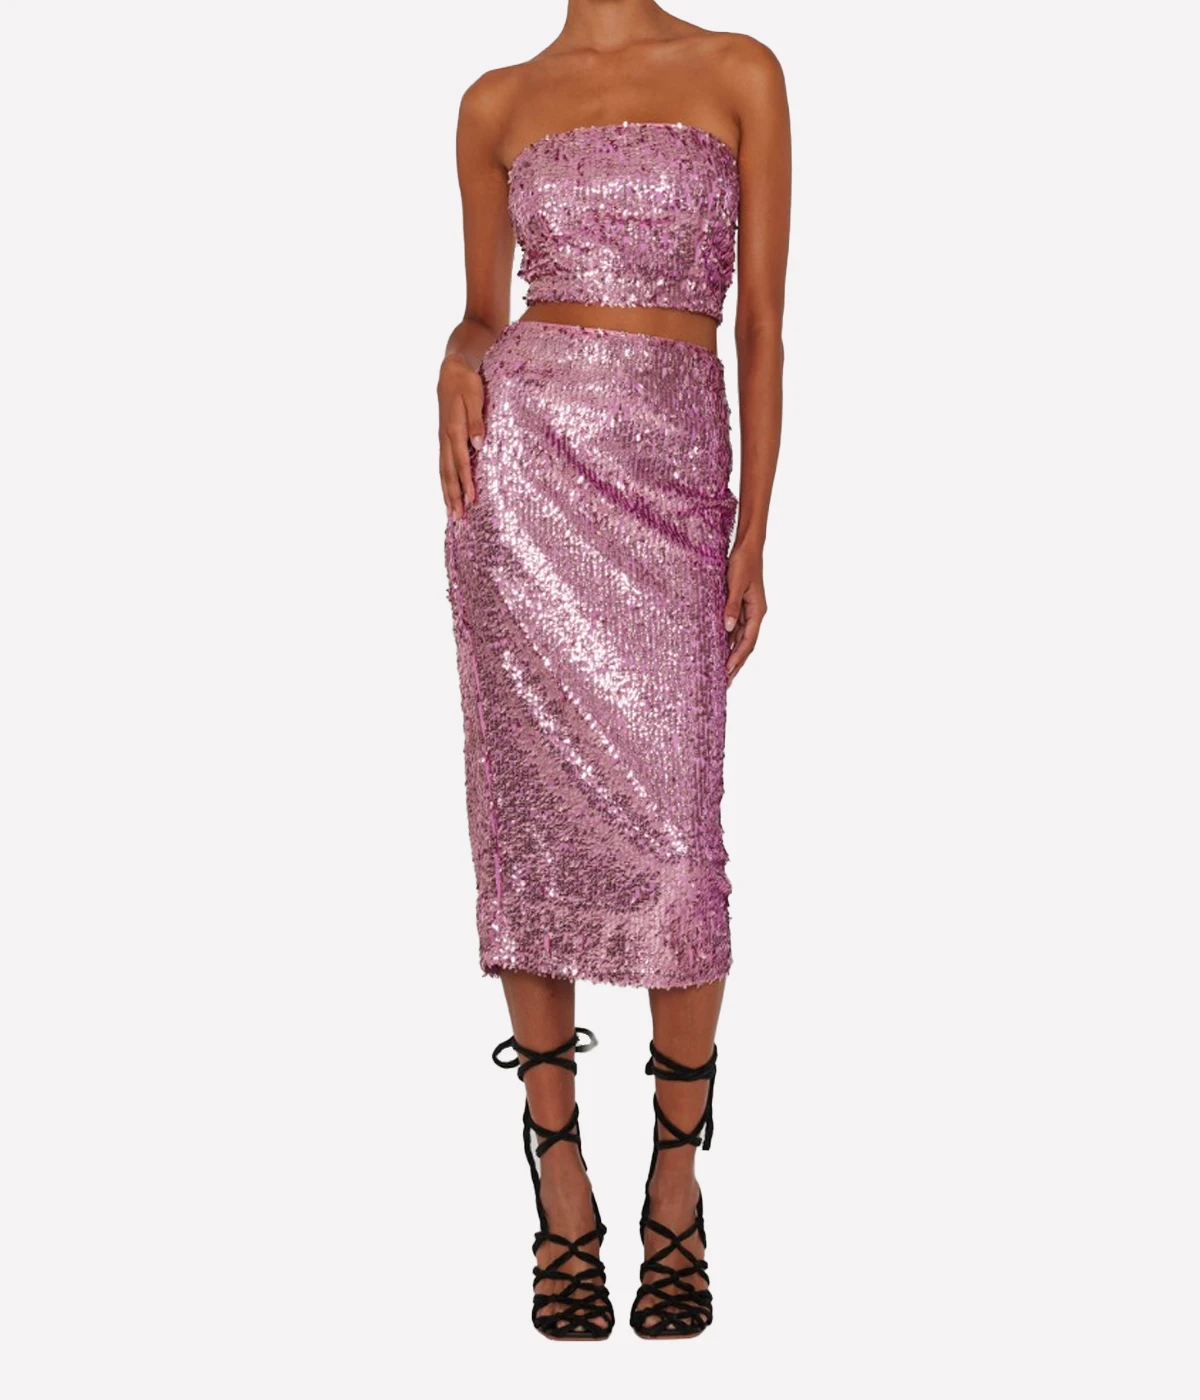 Sequin Pencil Skirt in Fuchsia Pink